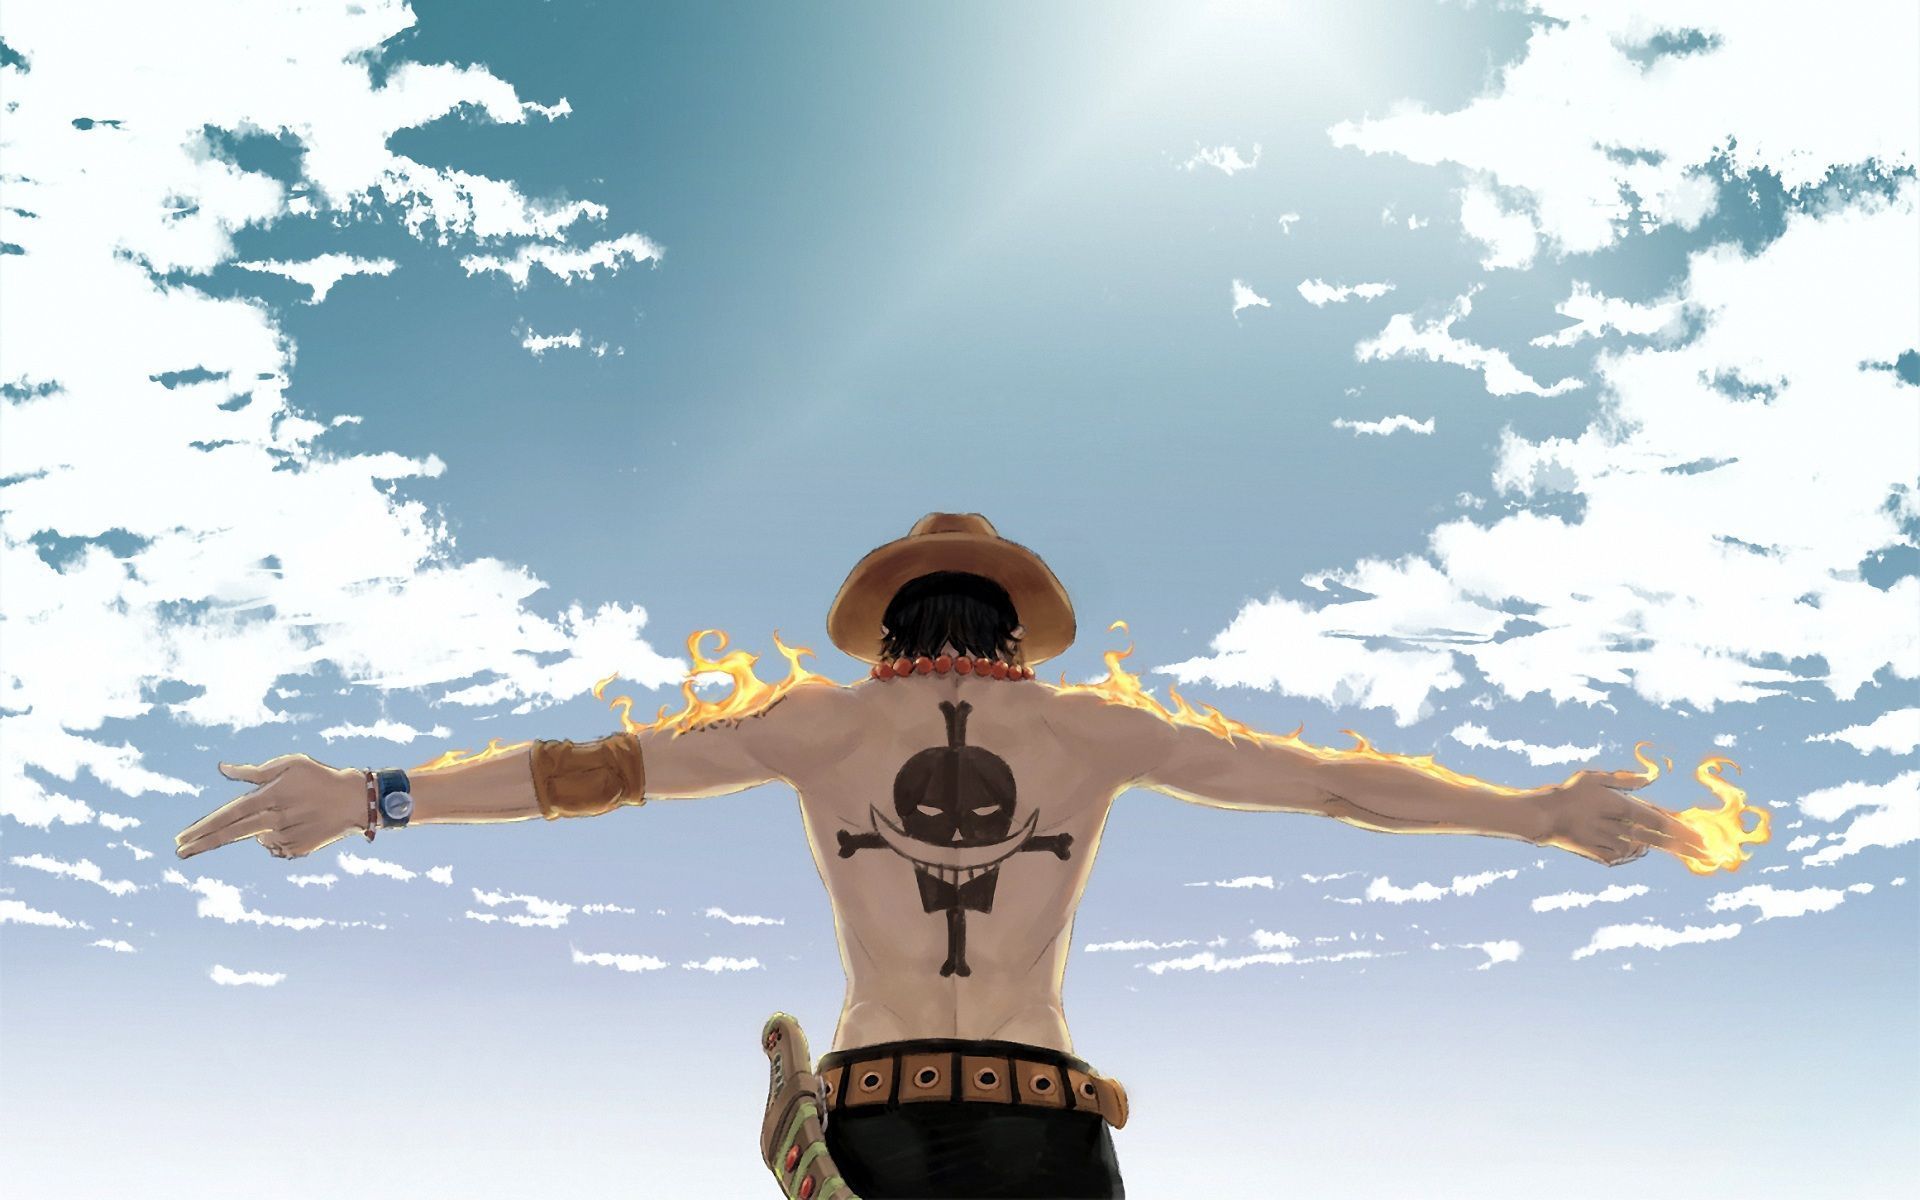 Ace One Piece wallpaper - Ace One Piece background - One Piece